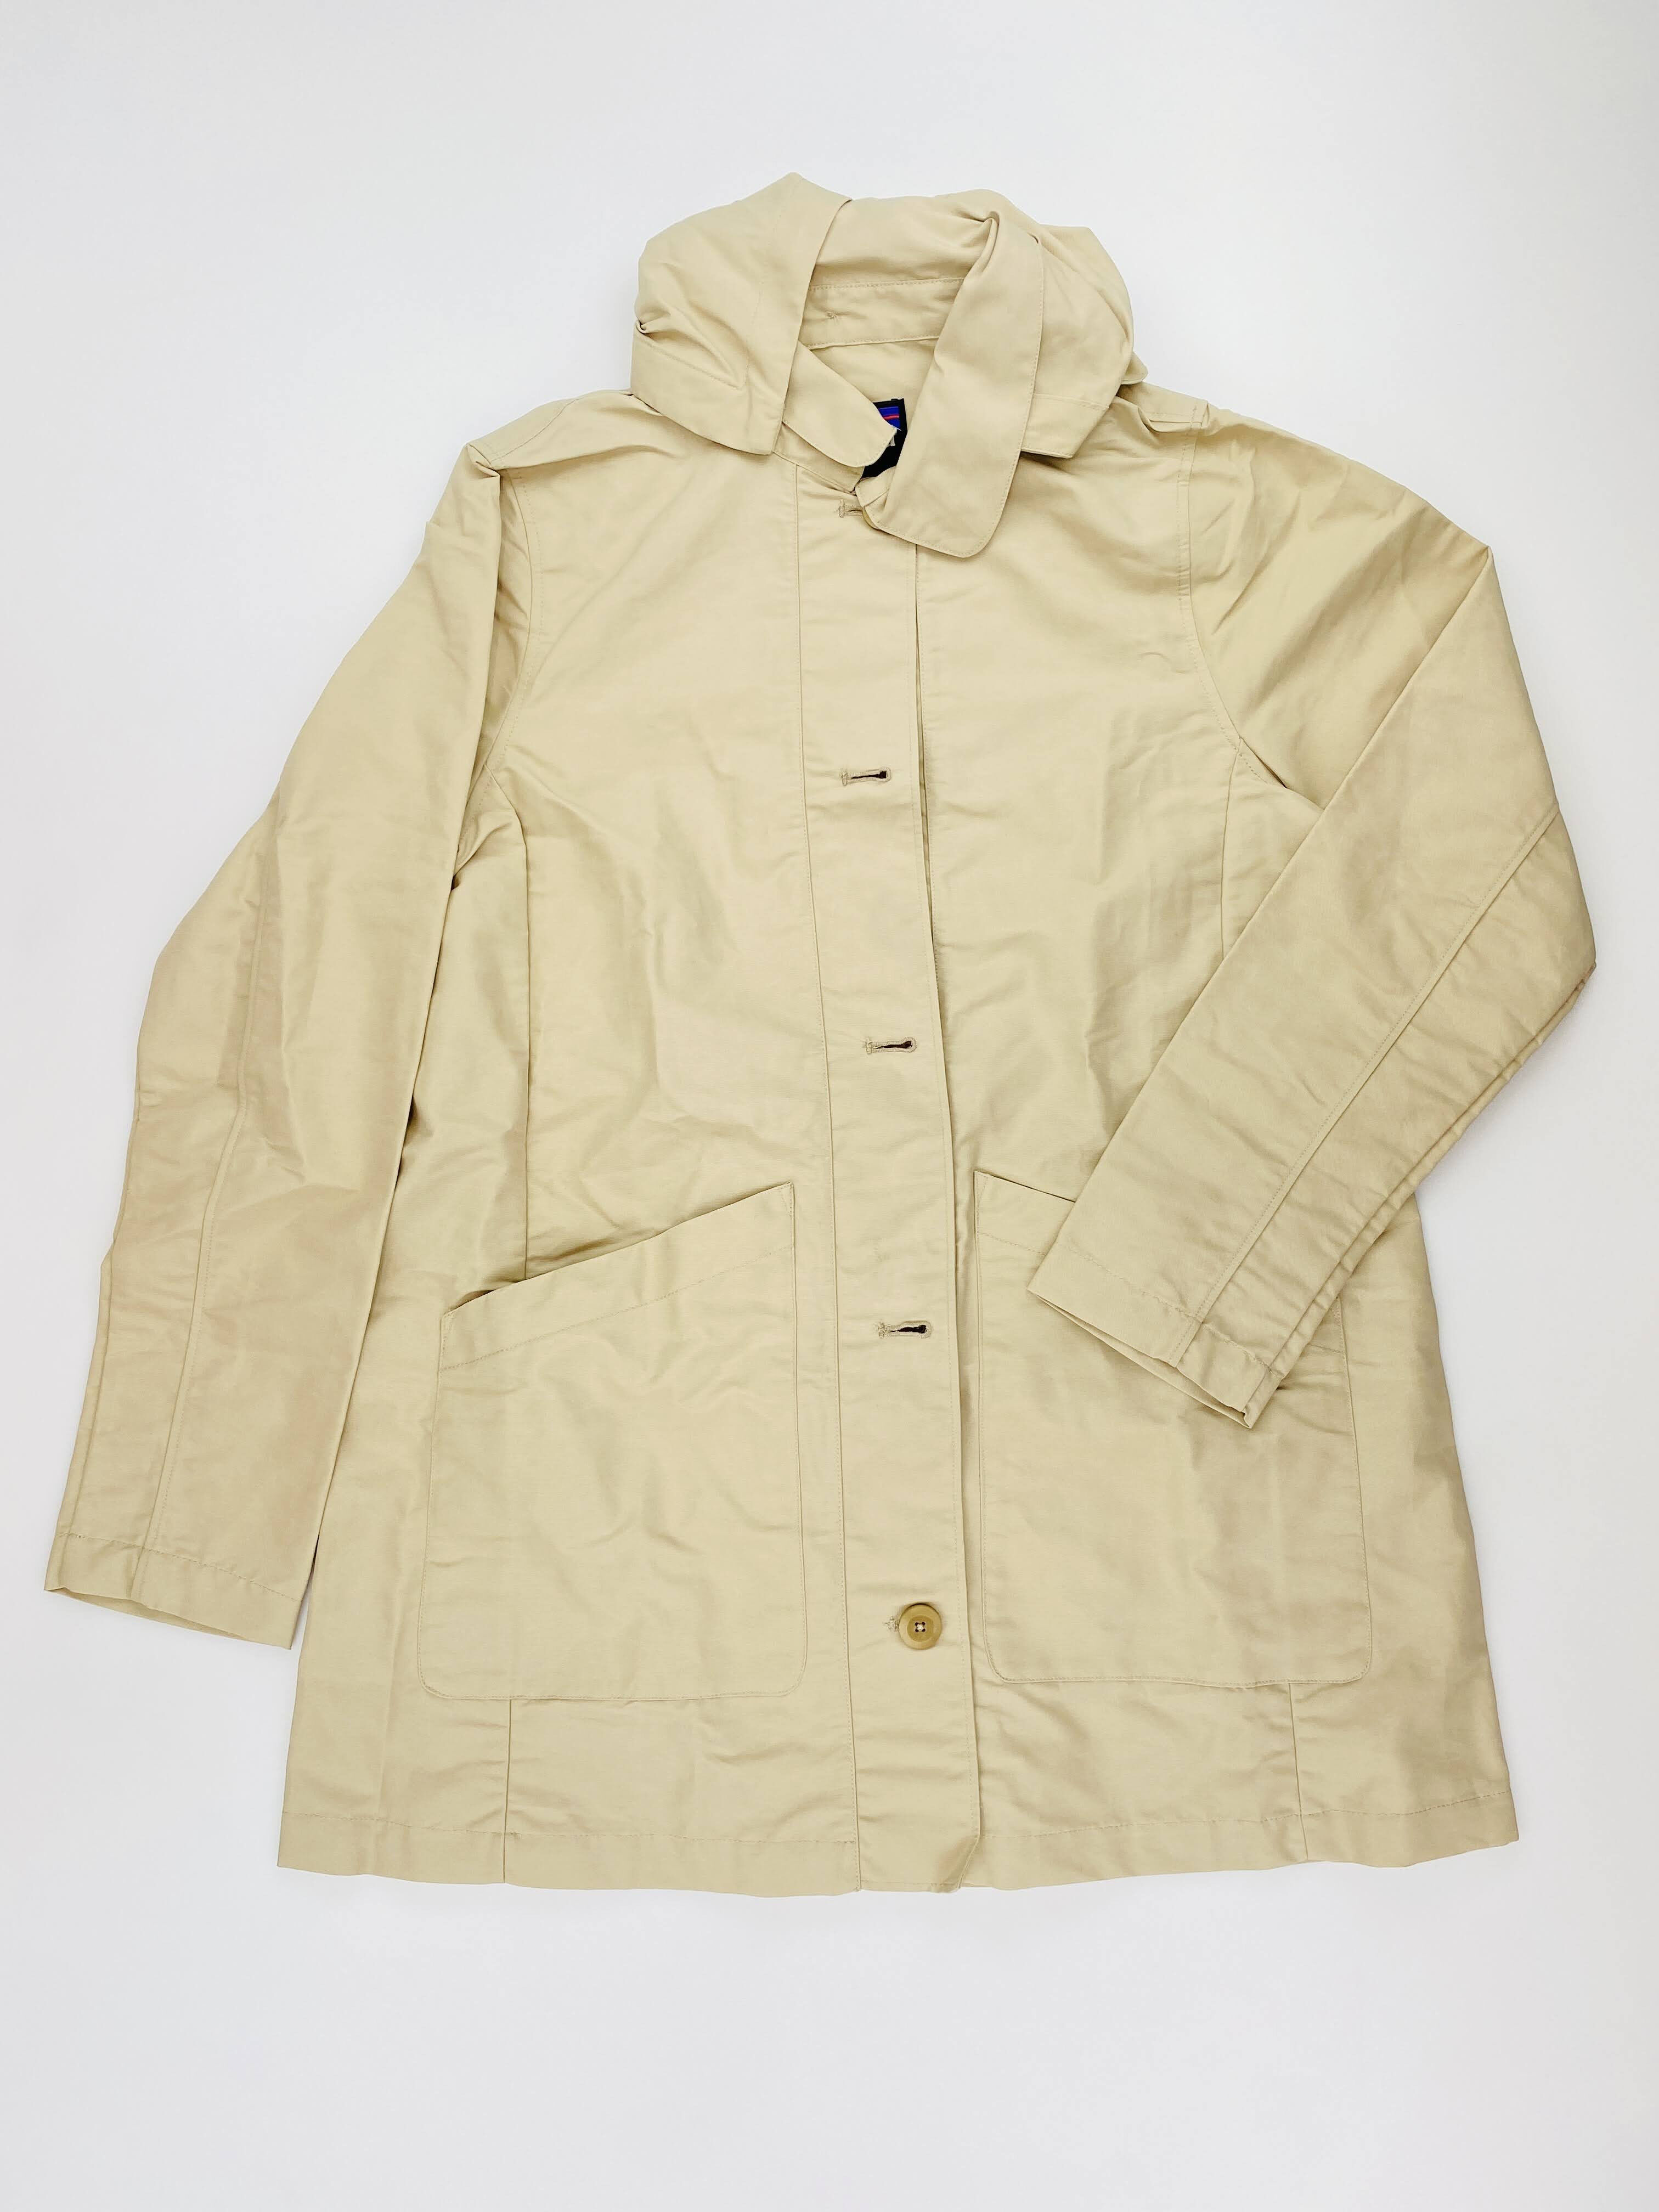 Patagonia W's Transitional Trench Jkt - Second Hand Jacke - Damen - Beige - S | Hardloop